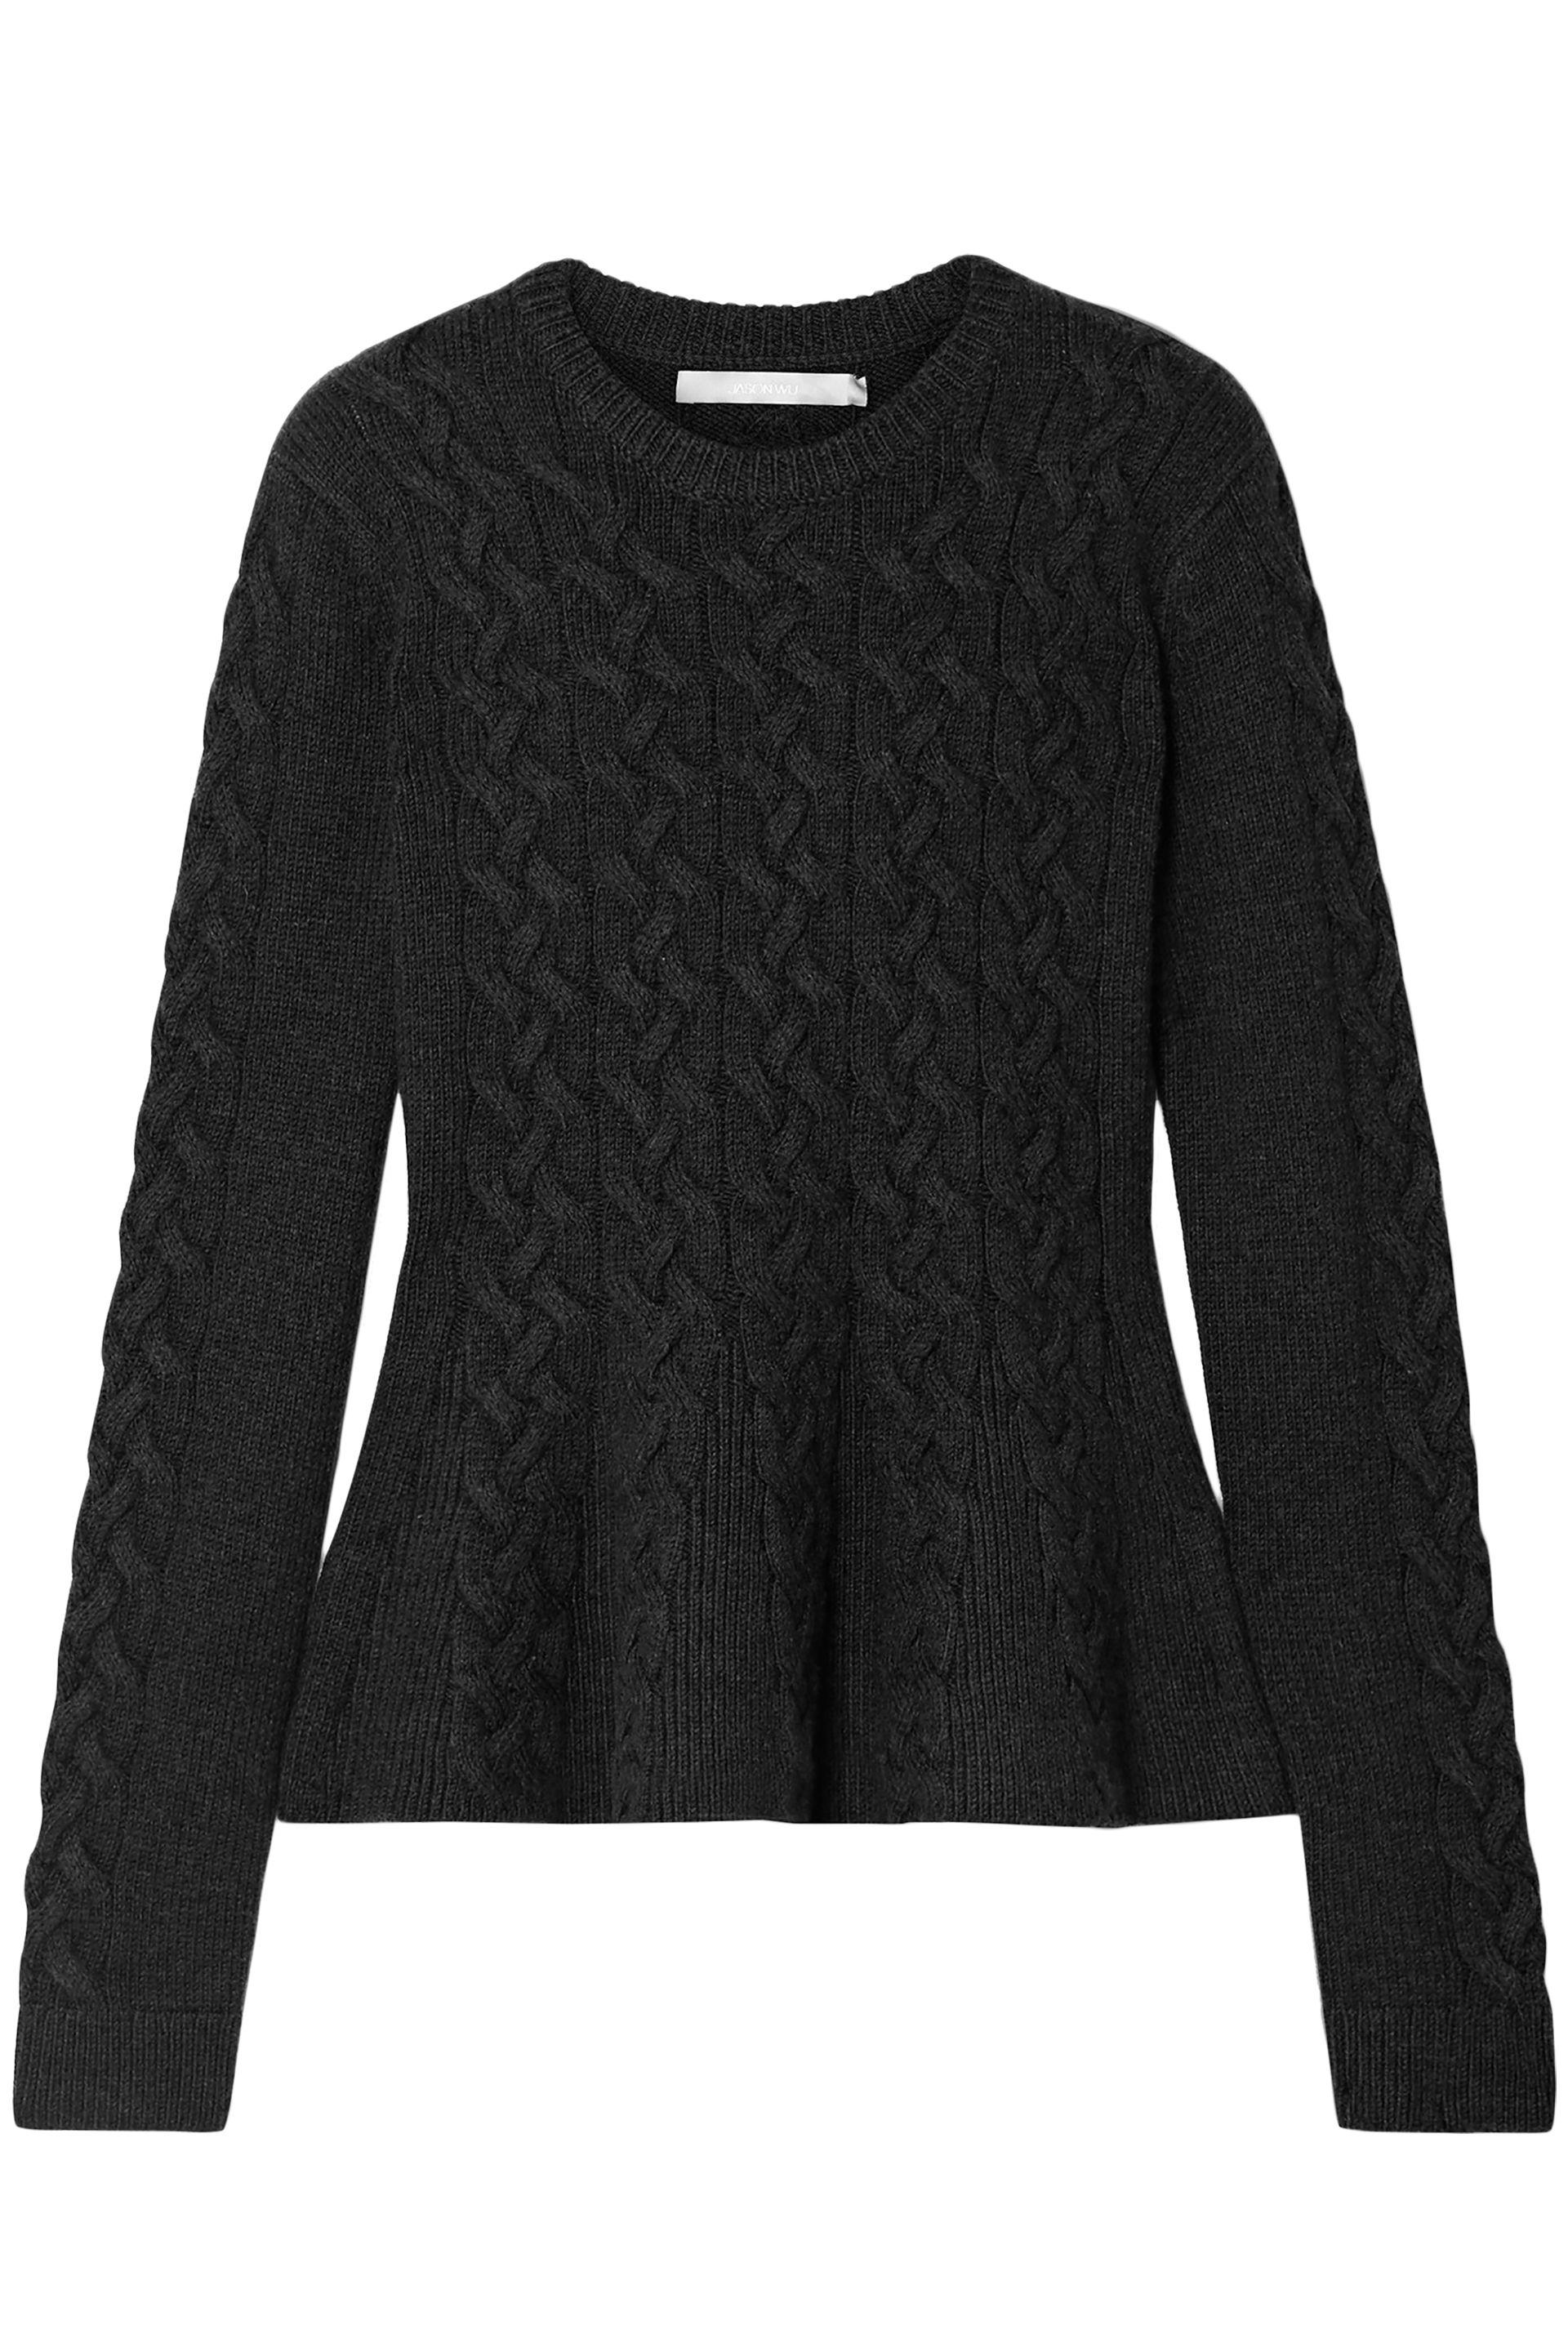 Jason Wu Cable-knit Wool-blend Peplum Sweater Charcoal in Gray - Lyst